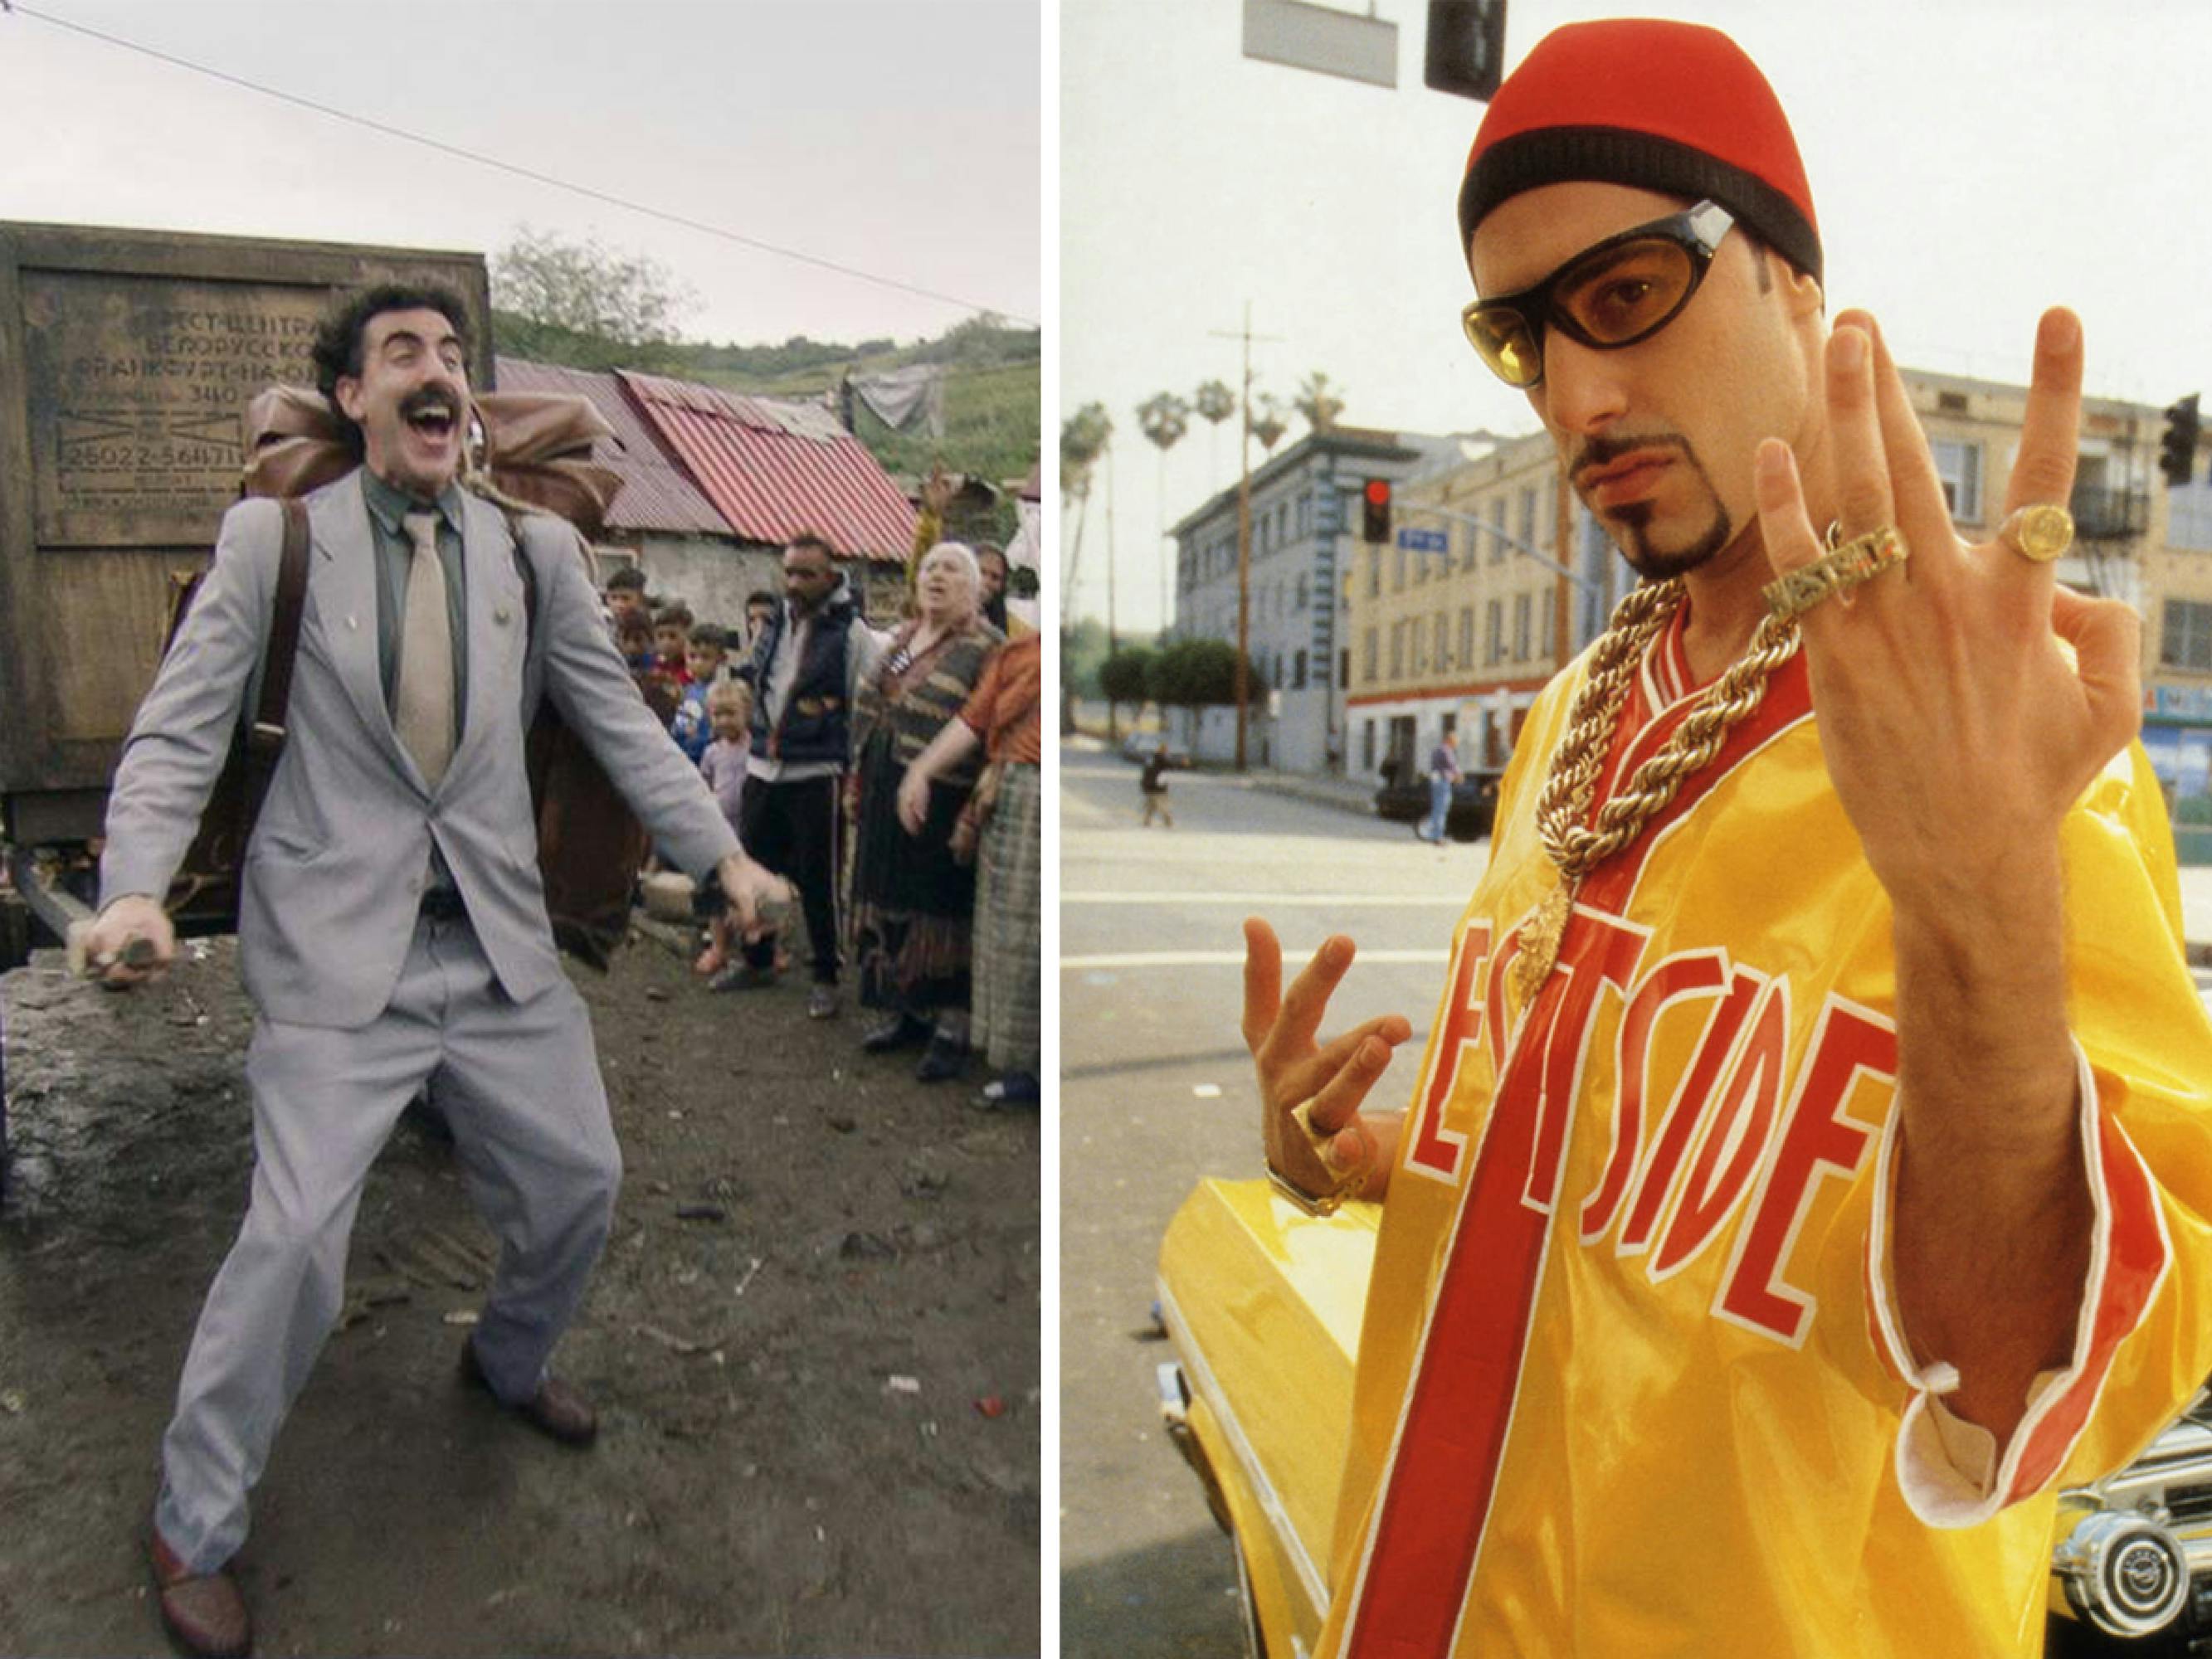 A diptych of Cohen’s two alter egos: Borat Sagdiyev and Ali G. Borat is dressed in his typical gray suit and aviator glasses, pointing two thumbs up next to a cactus. Ali G wears a yellow shirt, massive yellow chain, black glasses with yellow lenses, and a lot of gold jewelry.